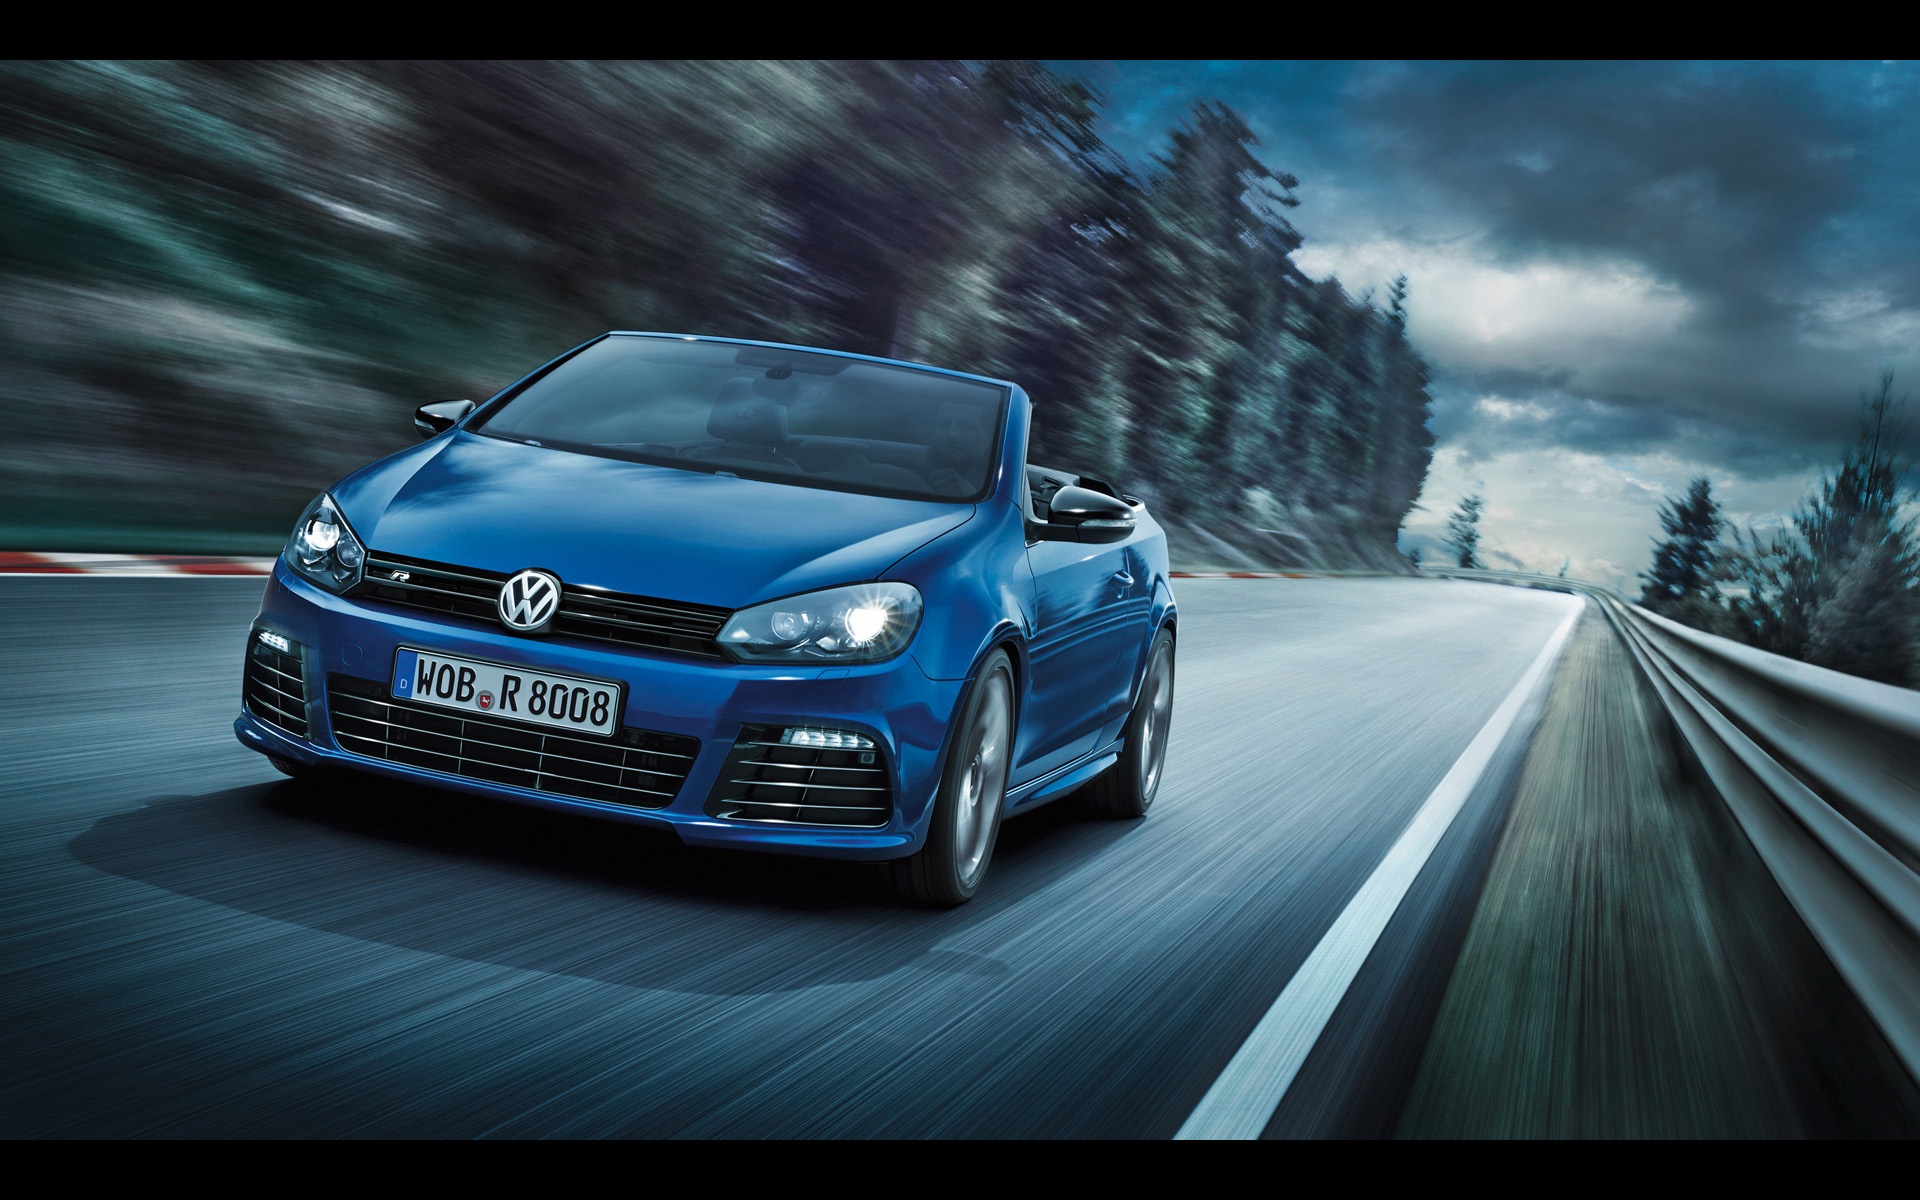  Golf R Cabriolet Motion Front Angle desktop PC and Mac wallpaper